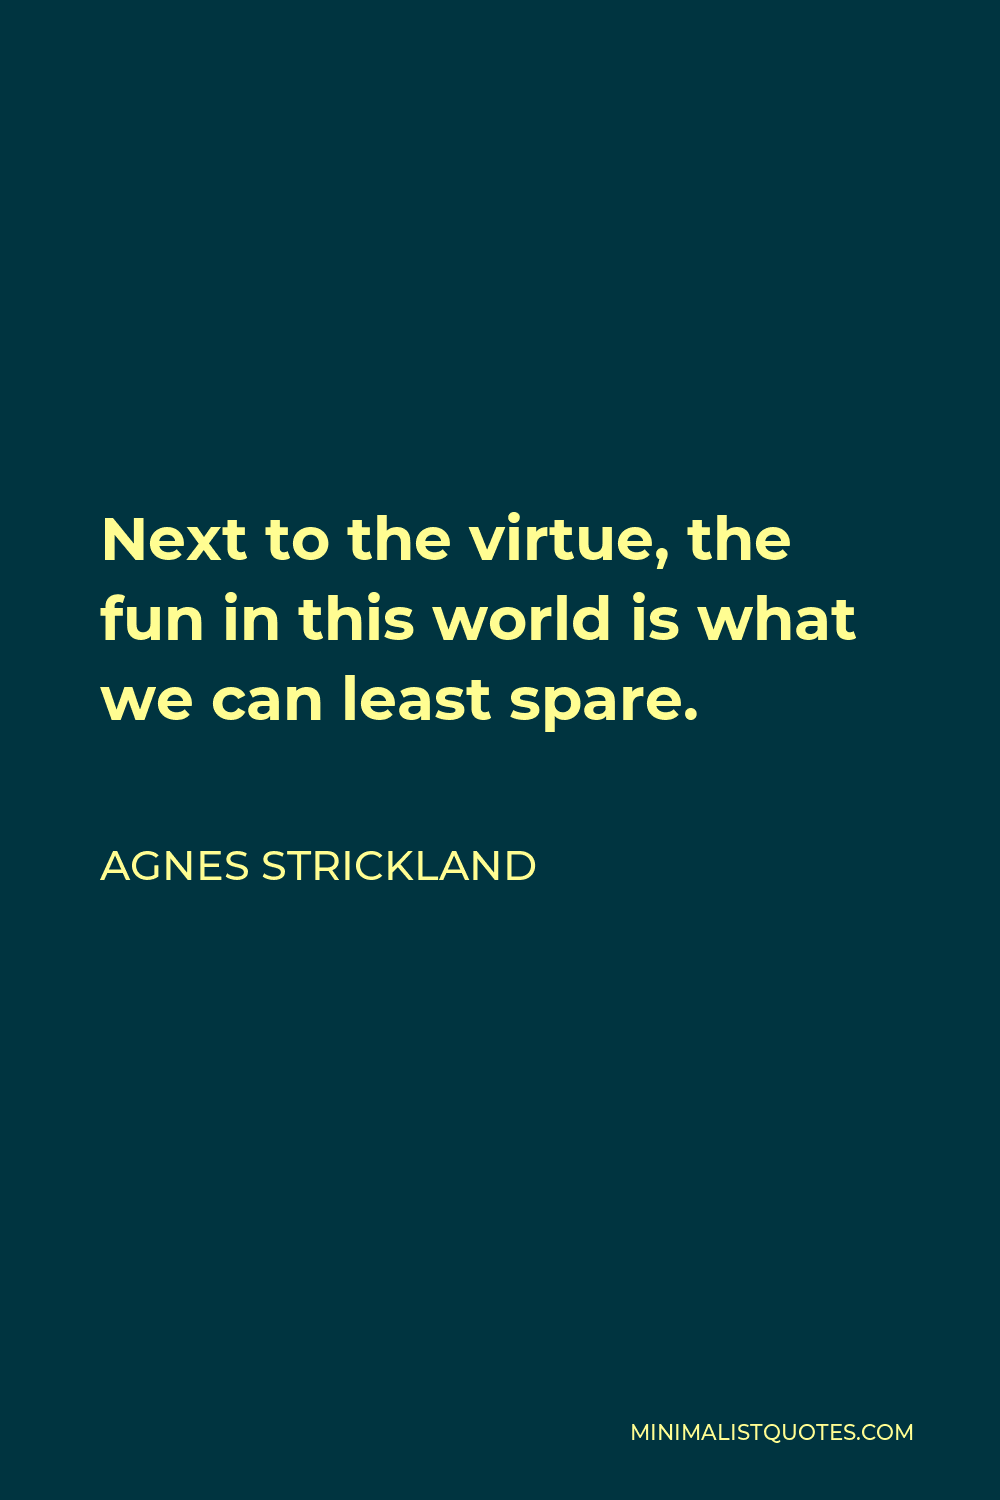 Agnes Strickland Quote - Next to the virtue, the fun in this world is what we can least spare.